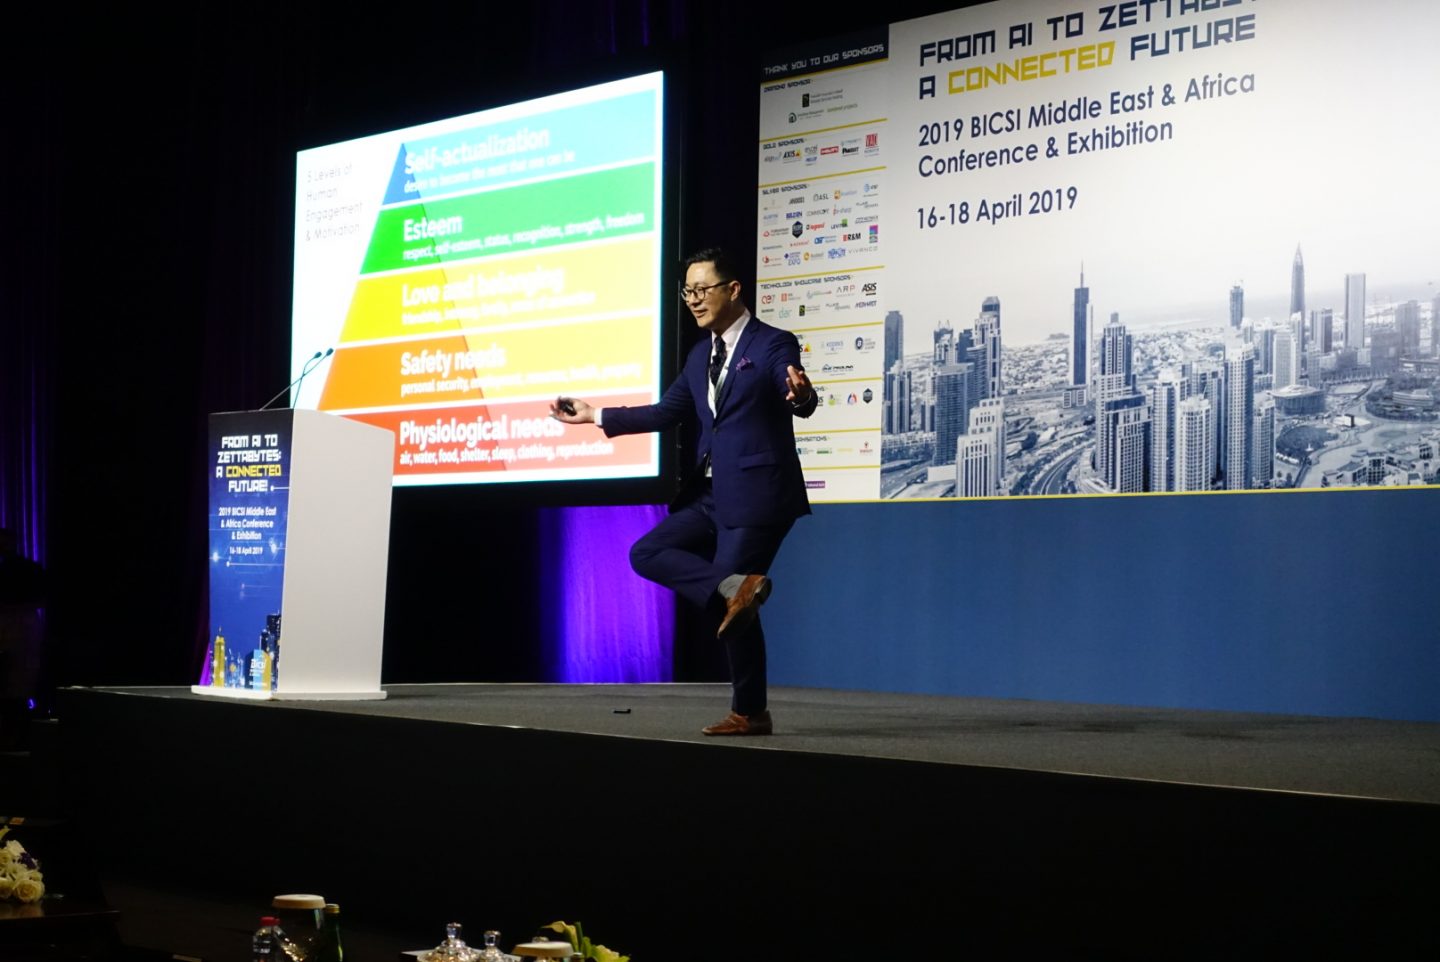 Eugene speaking at a conference in Dubai.